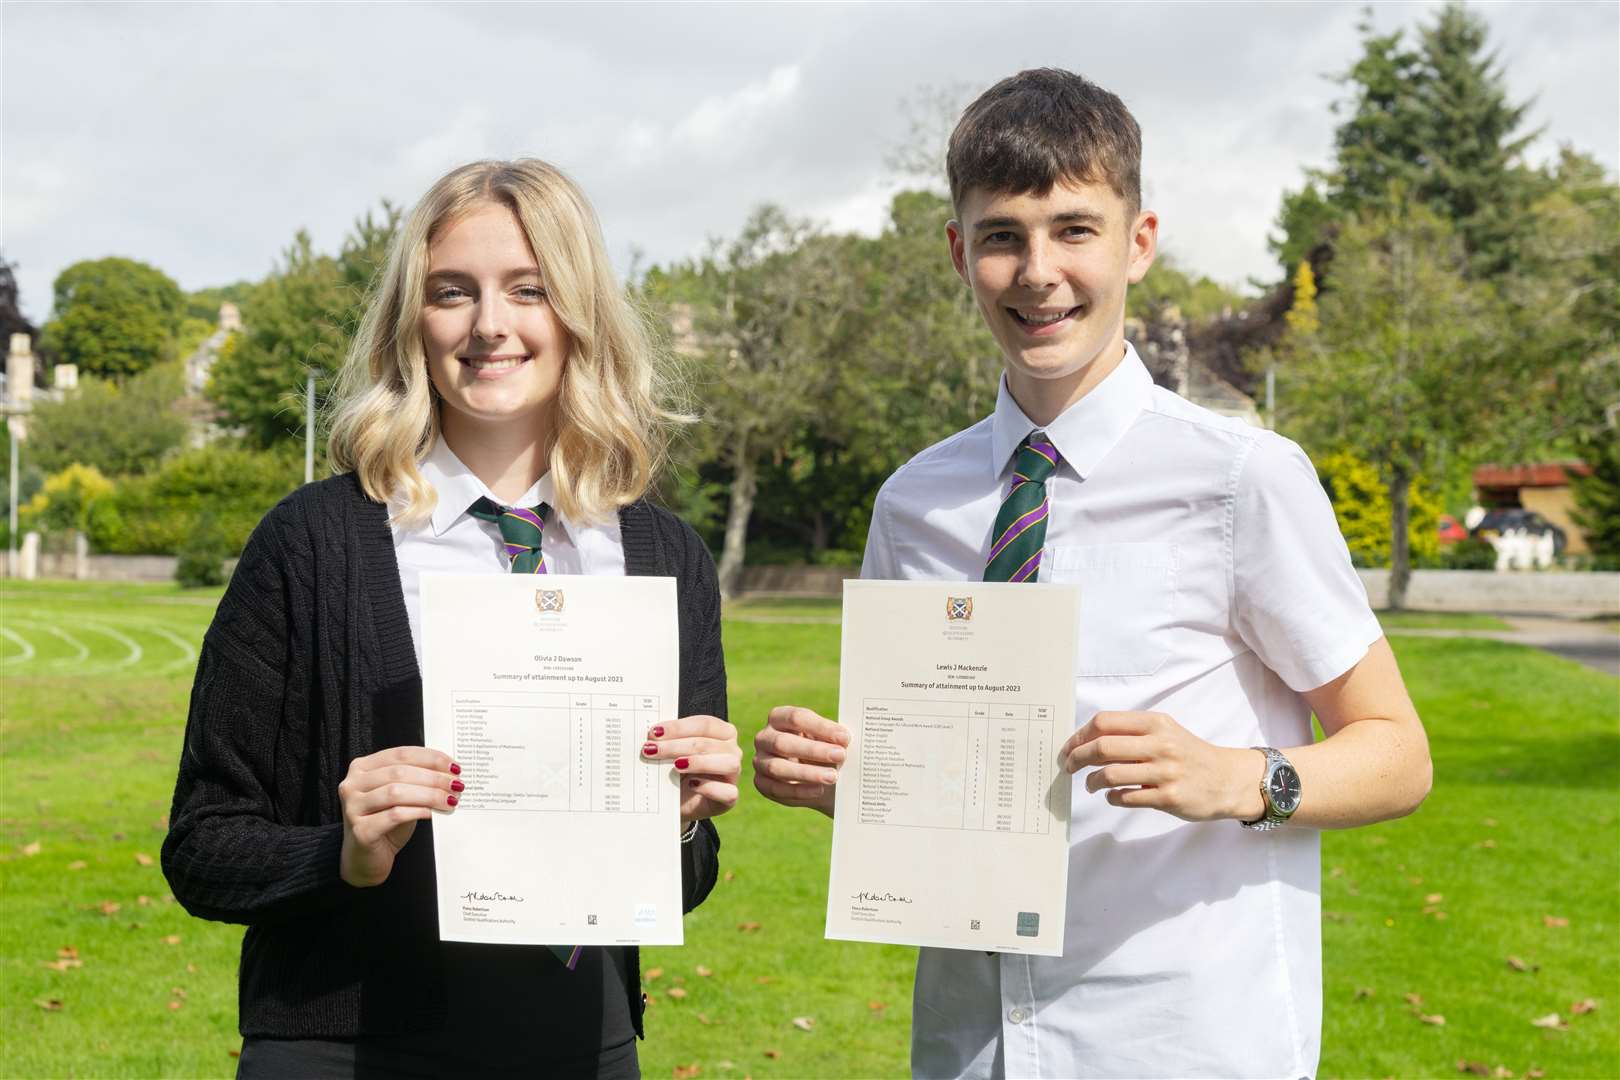 S5 students Olivia Dawson and Lewis Mackenzie got 5As at Higher.